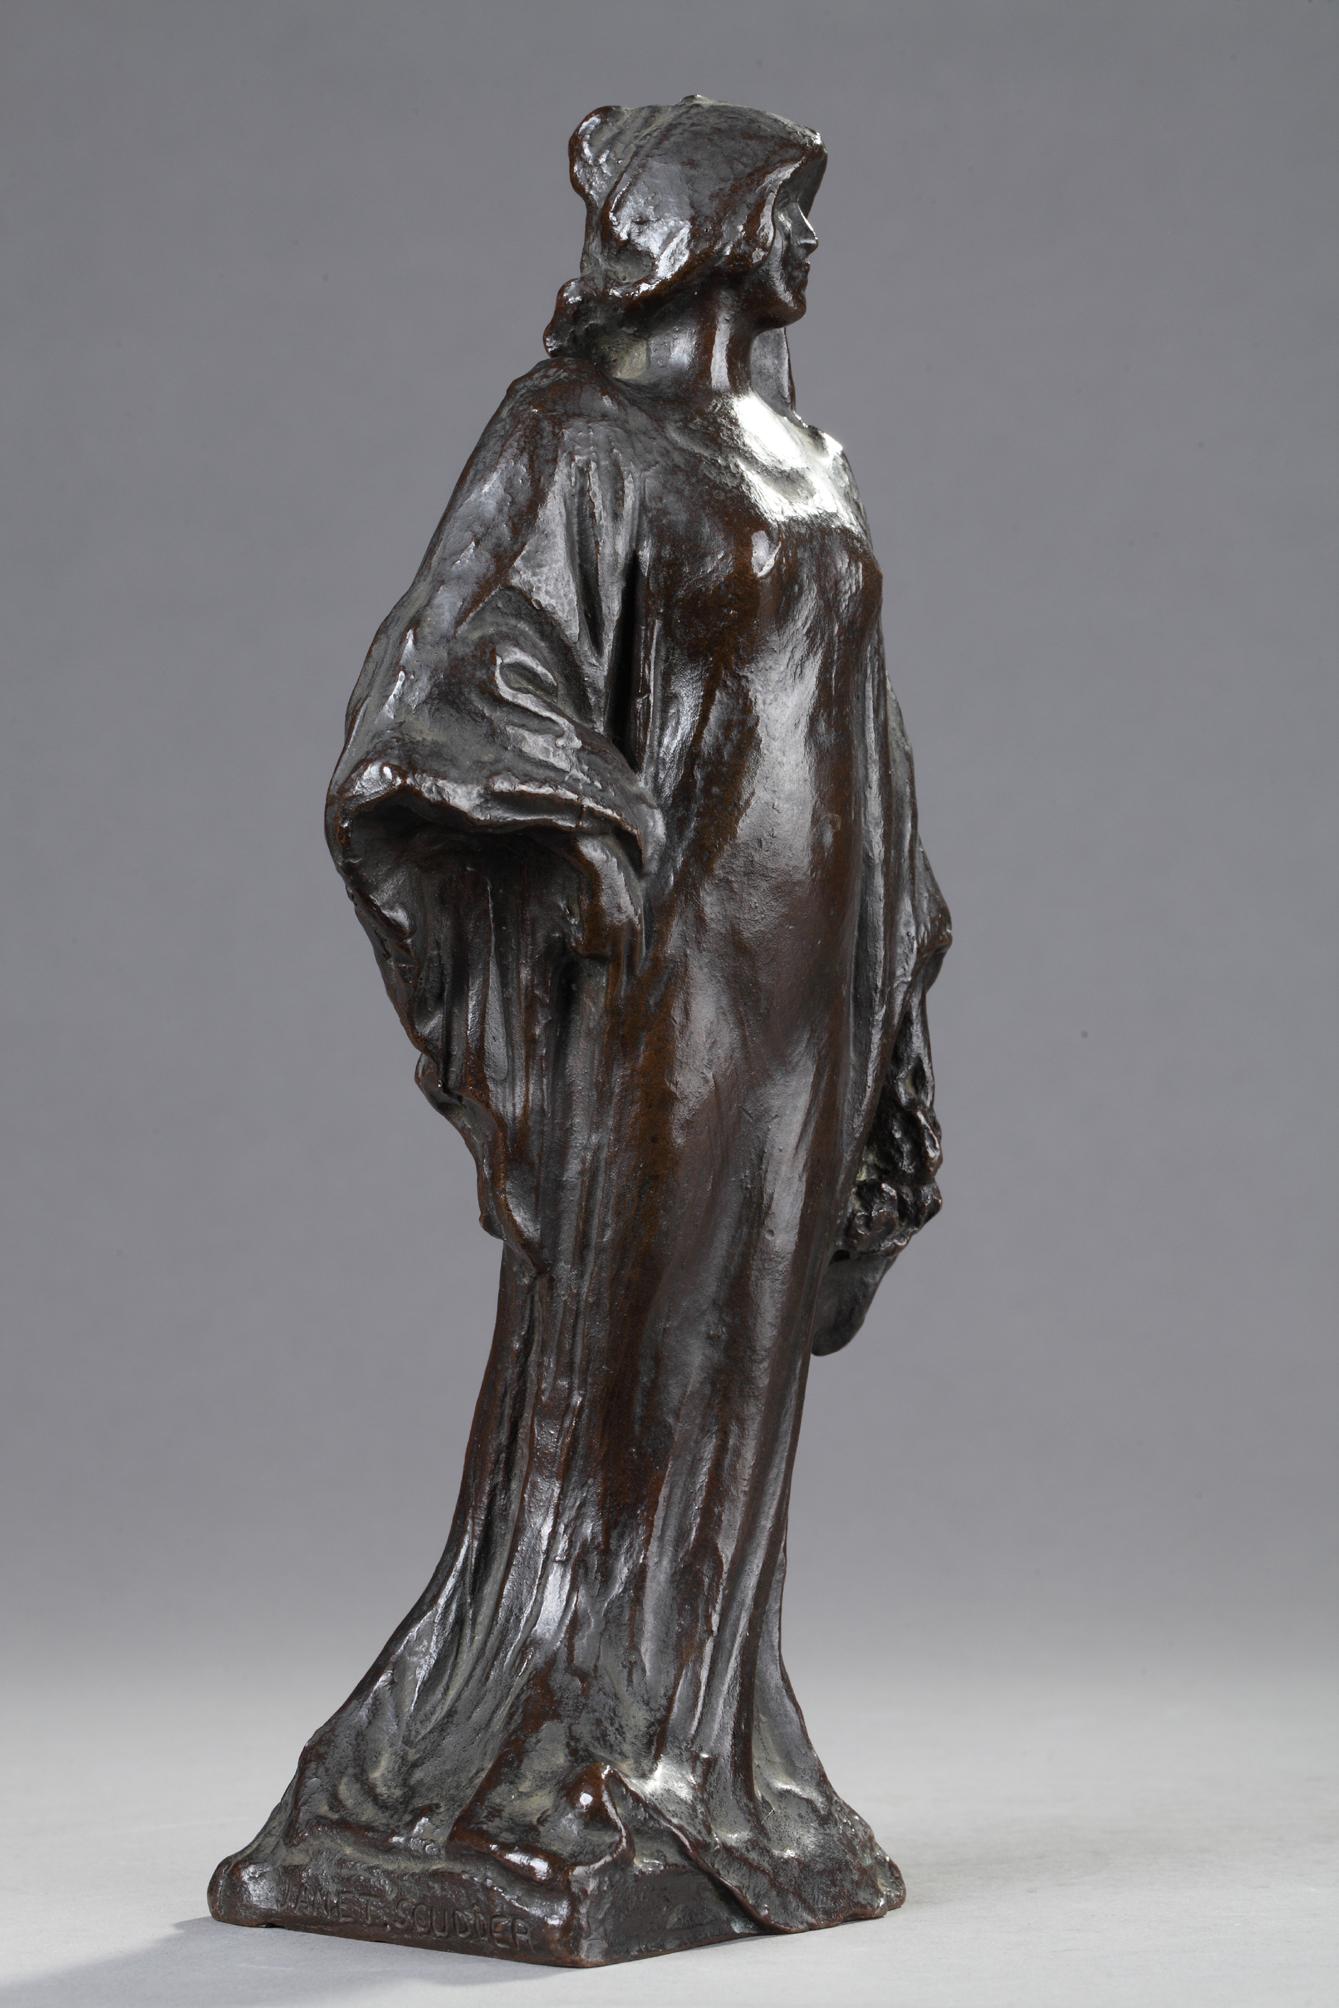 The Bride
by Janet Scudder (1869-1940)

Bronze with dark brown patina
signed 